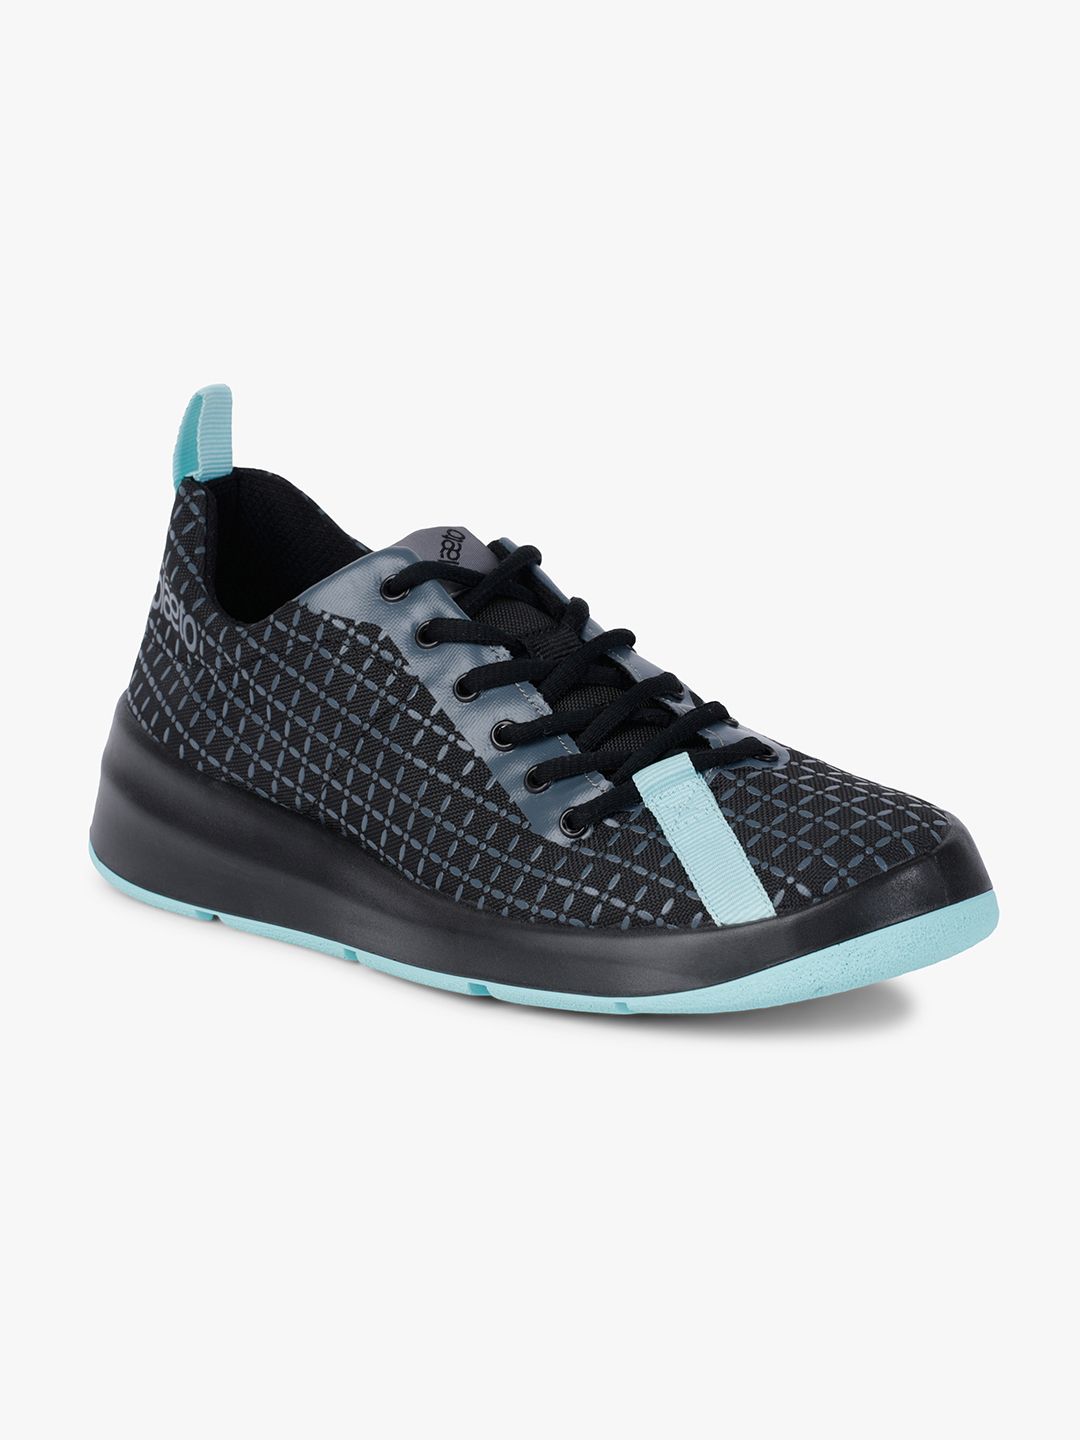 plaeto Women Black Riff Non-Marking Running Sports Shoes Price in India